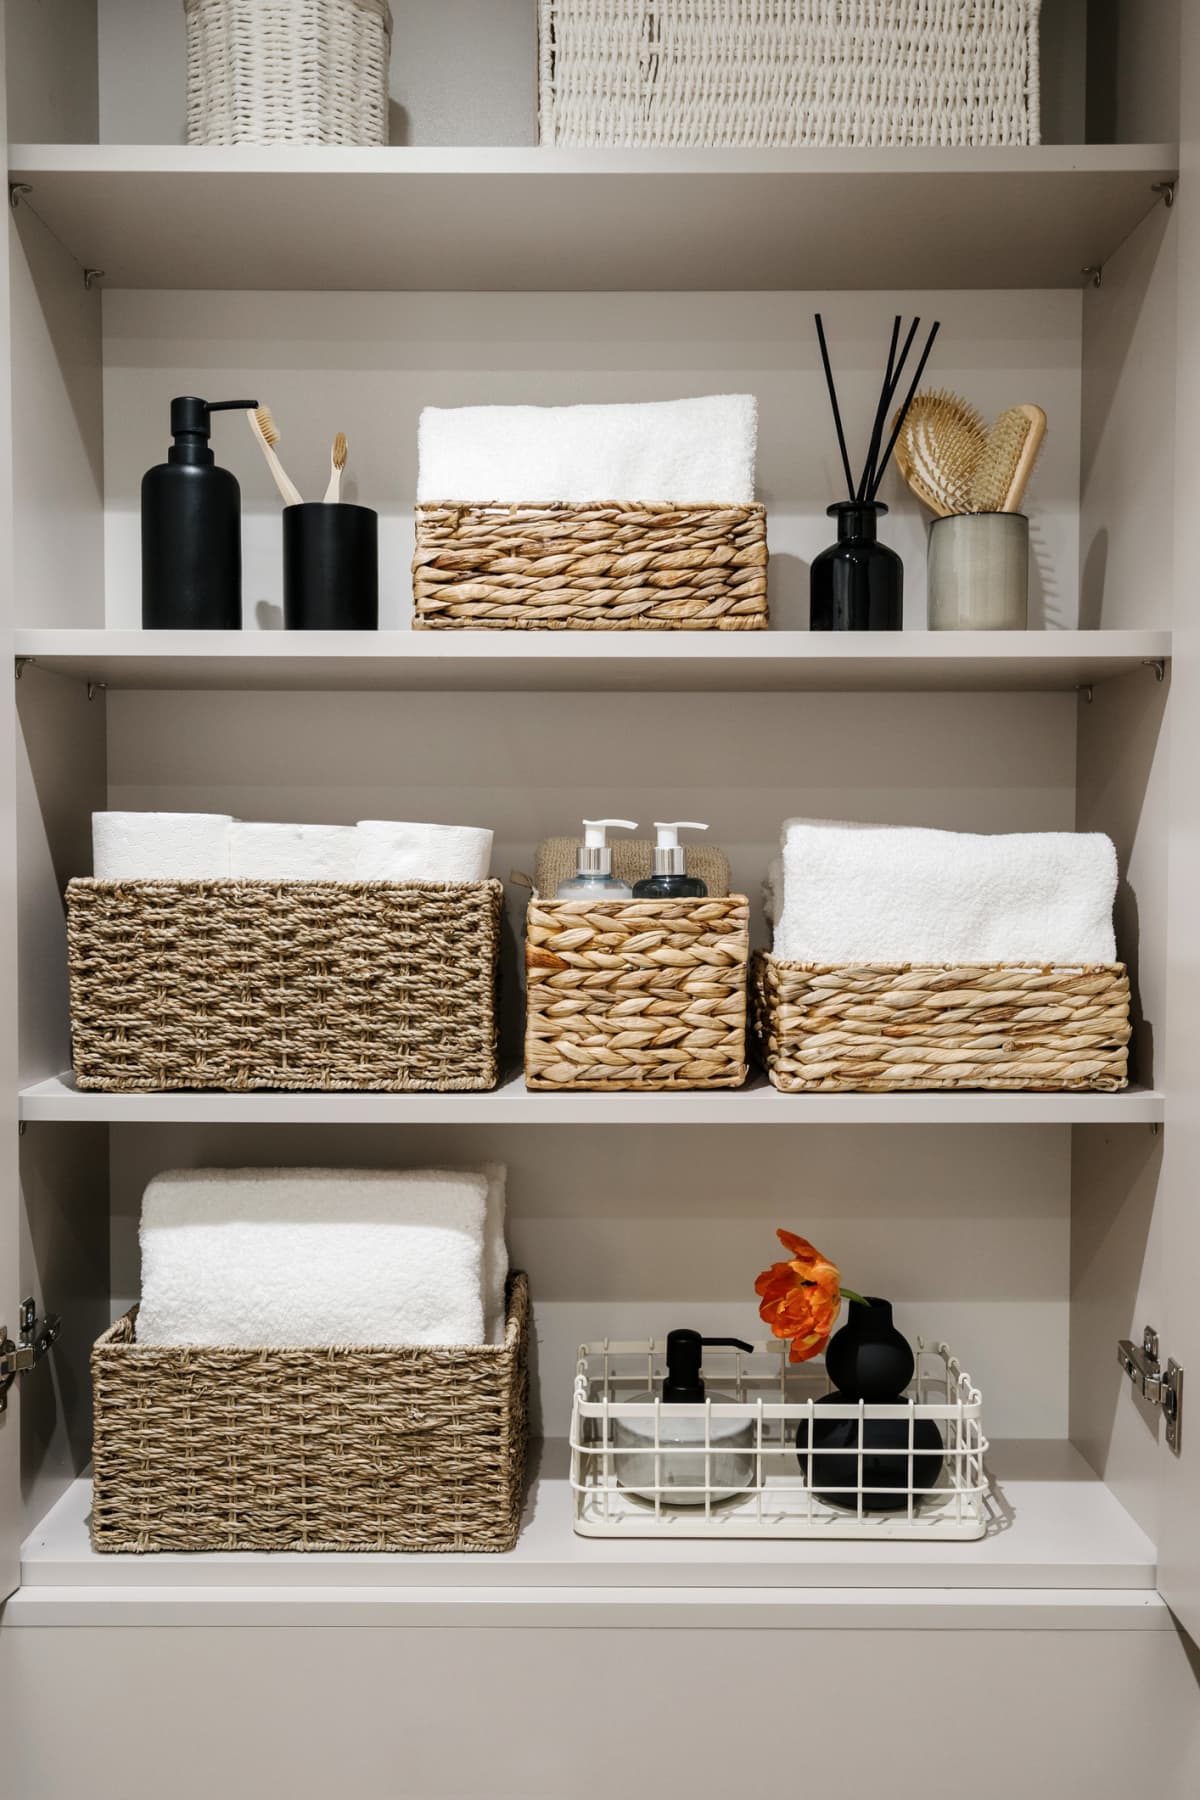 Shelves with baskets in bathroom